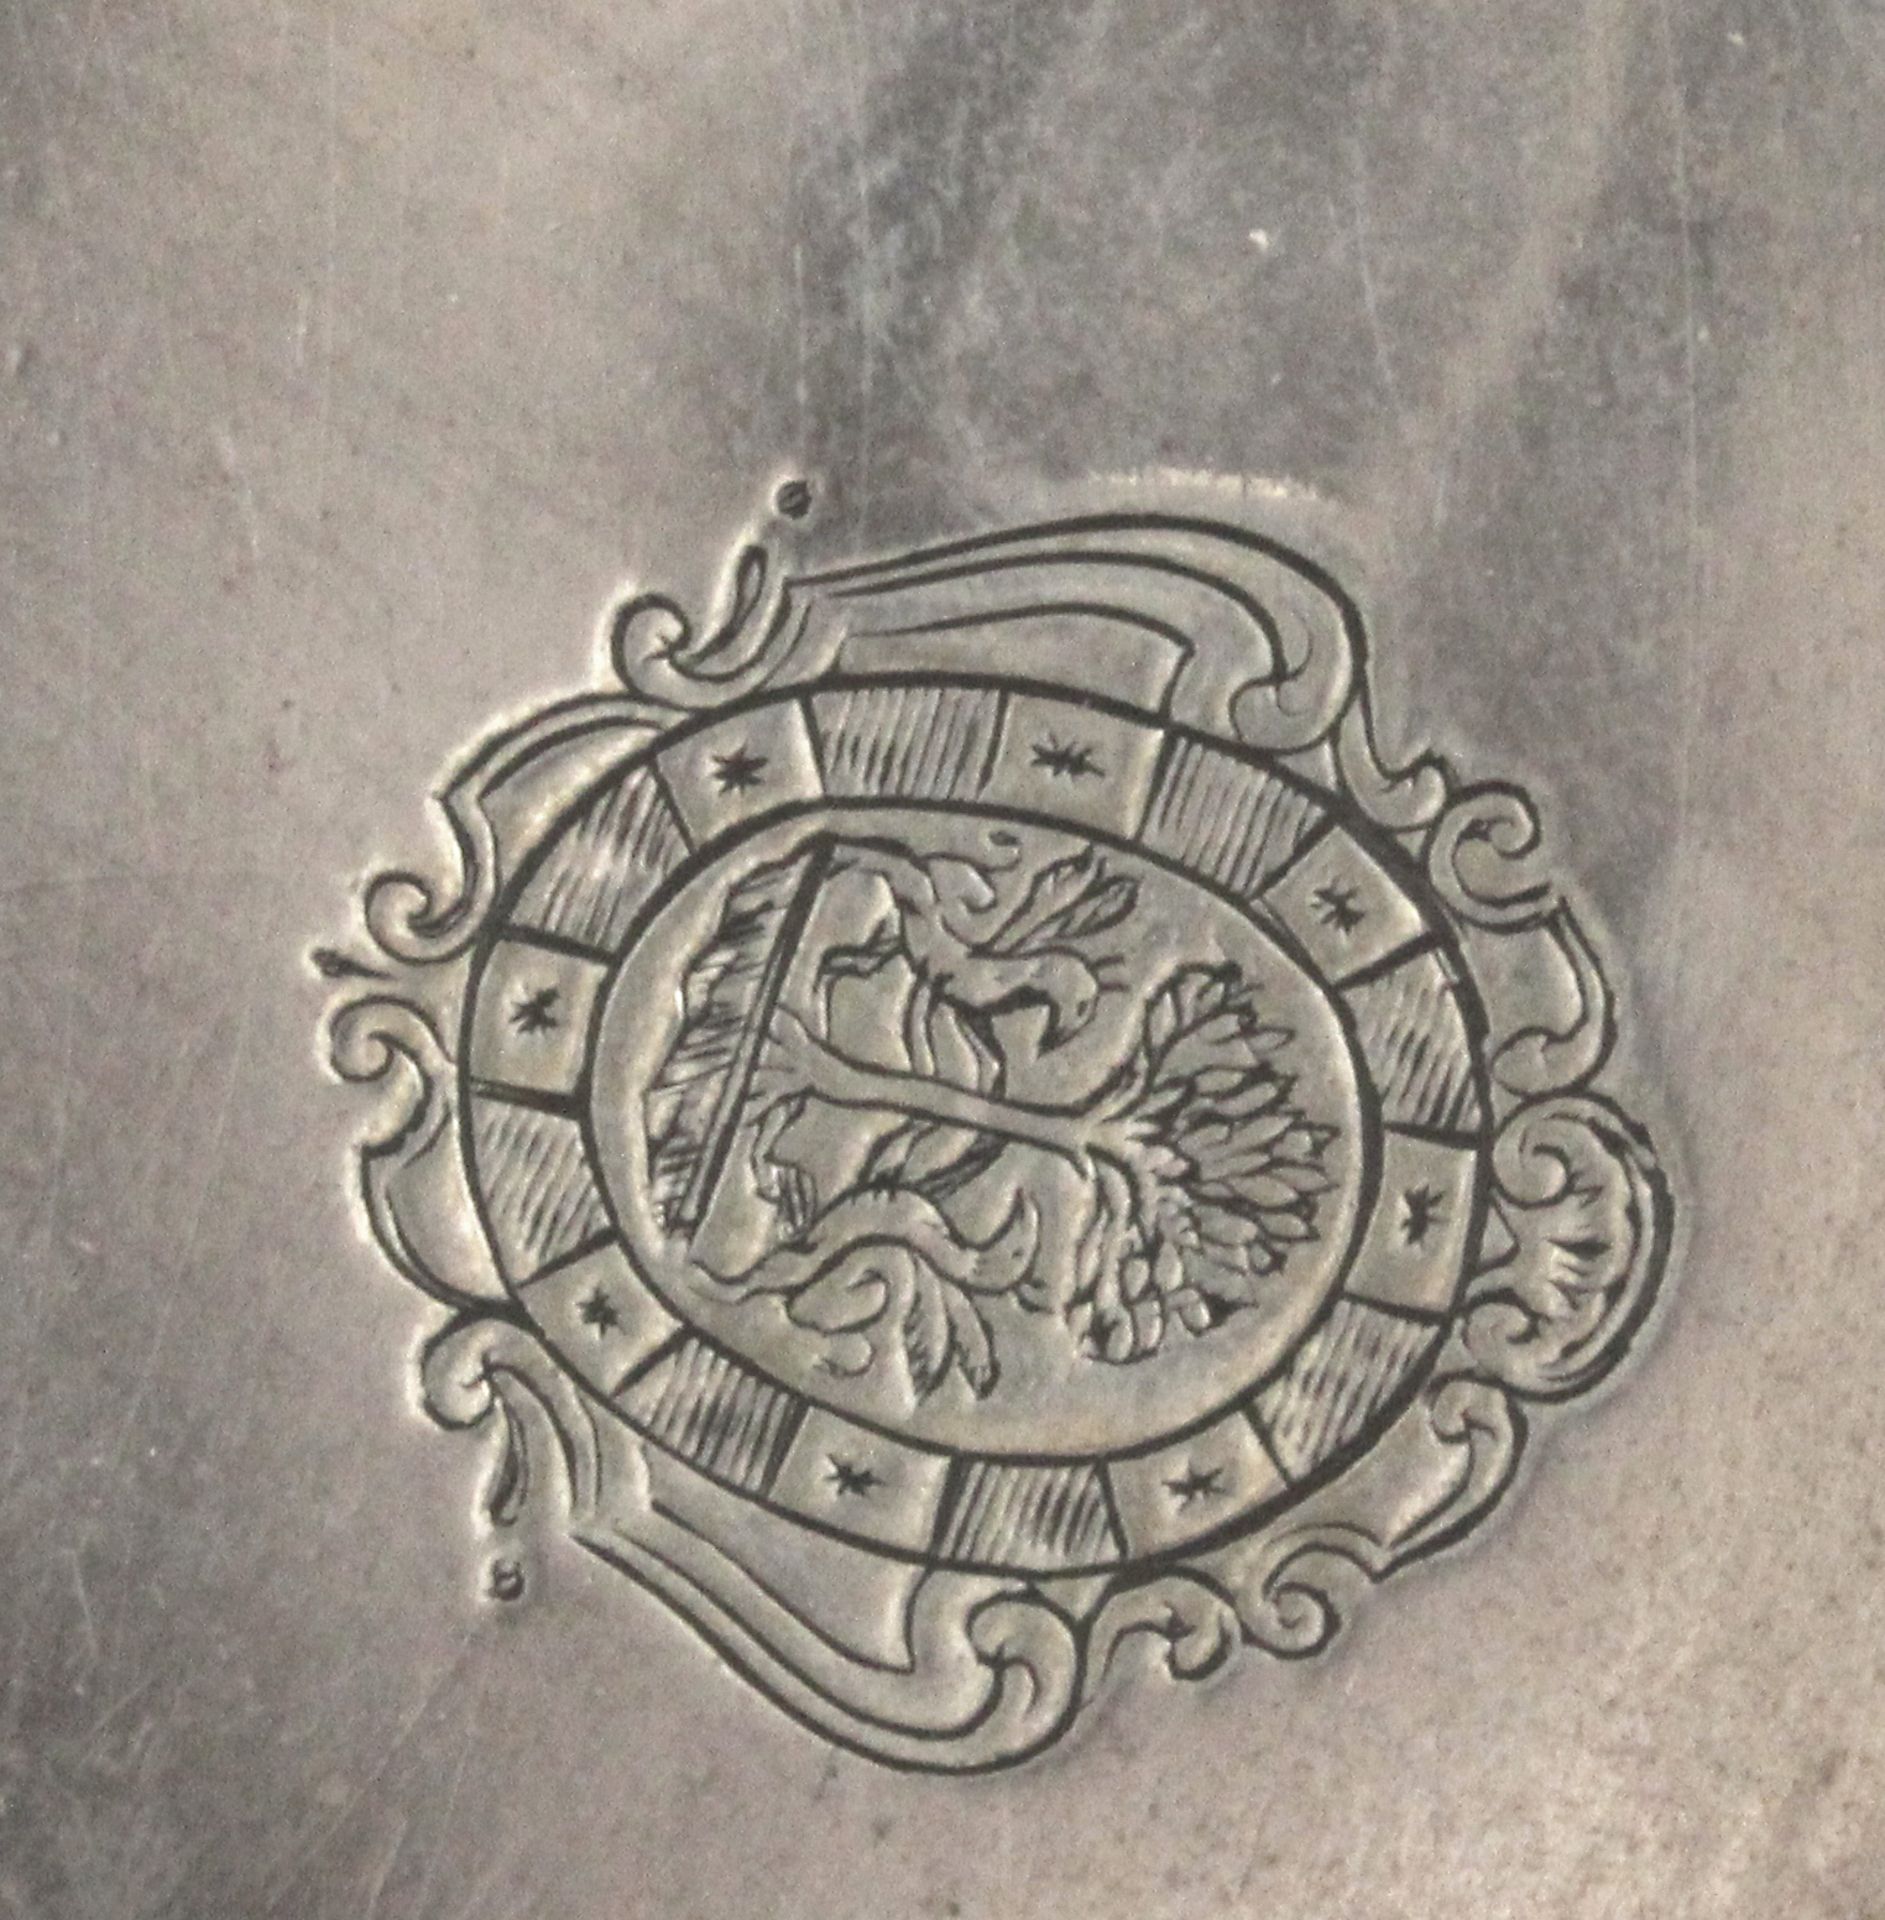 A late 18th century-early 19th century silver tray with hallmarks from Barcelona - Image 2 of 3